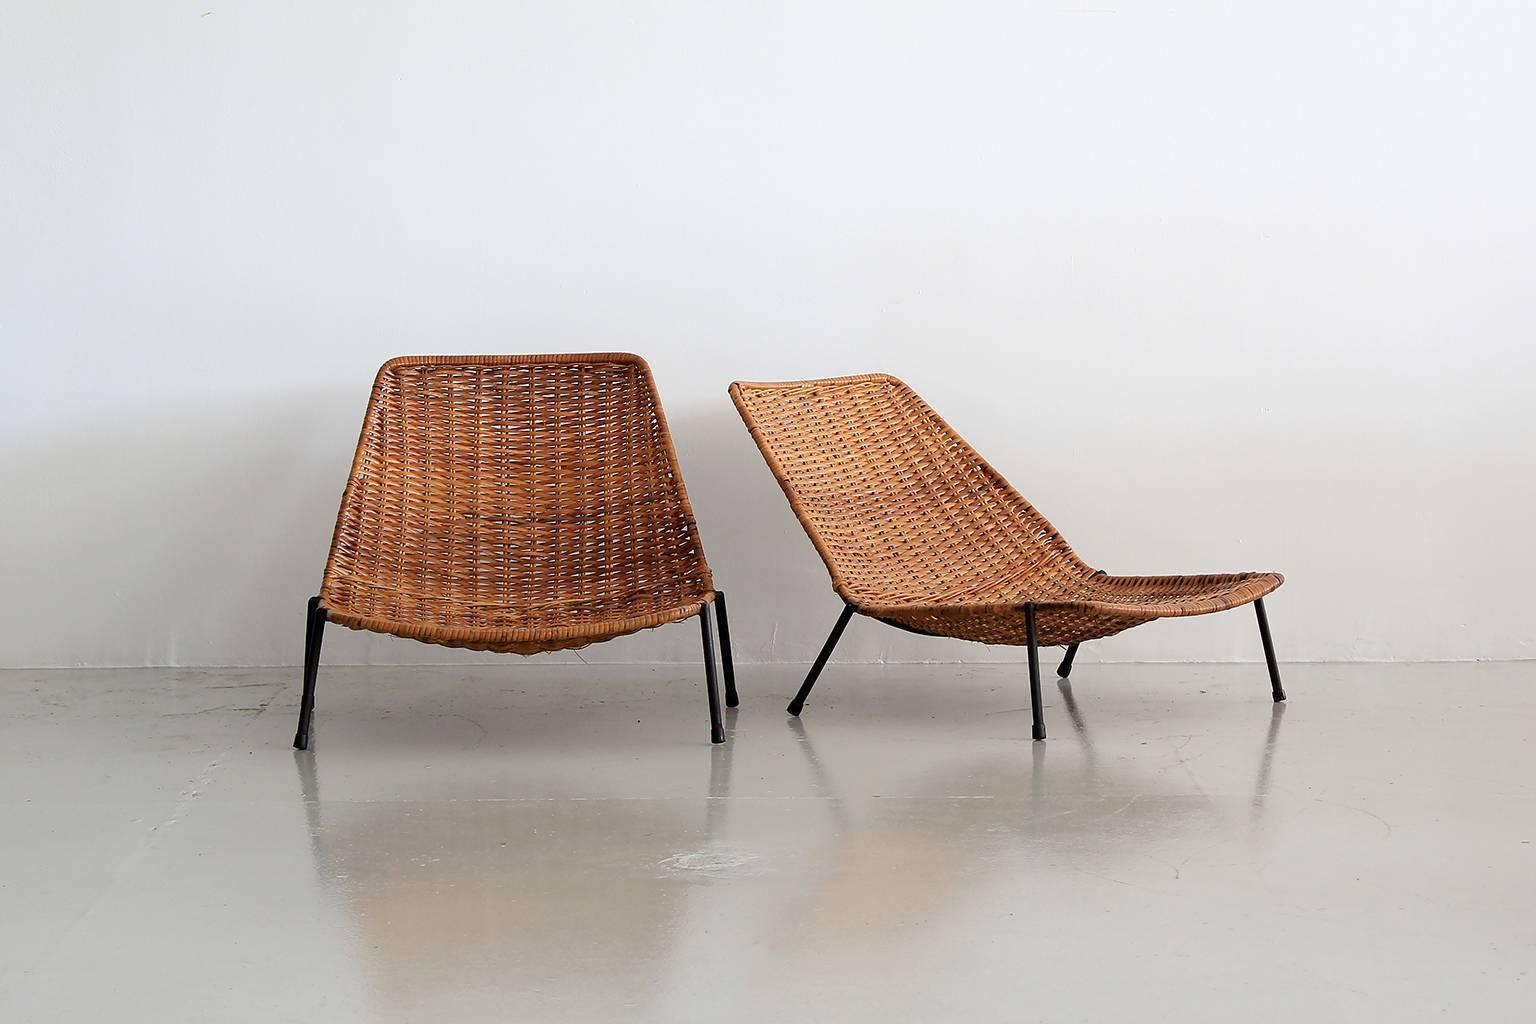 Unique pair of woven wicker pool chairs with iron base in the style of Carlo Graffi.
Great scale and low to the ground. Perfect for lounging by pool or perhaps a kids room!
       